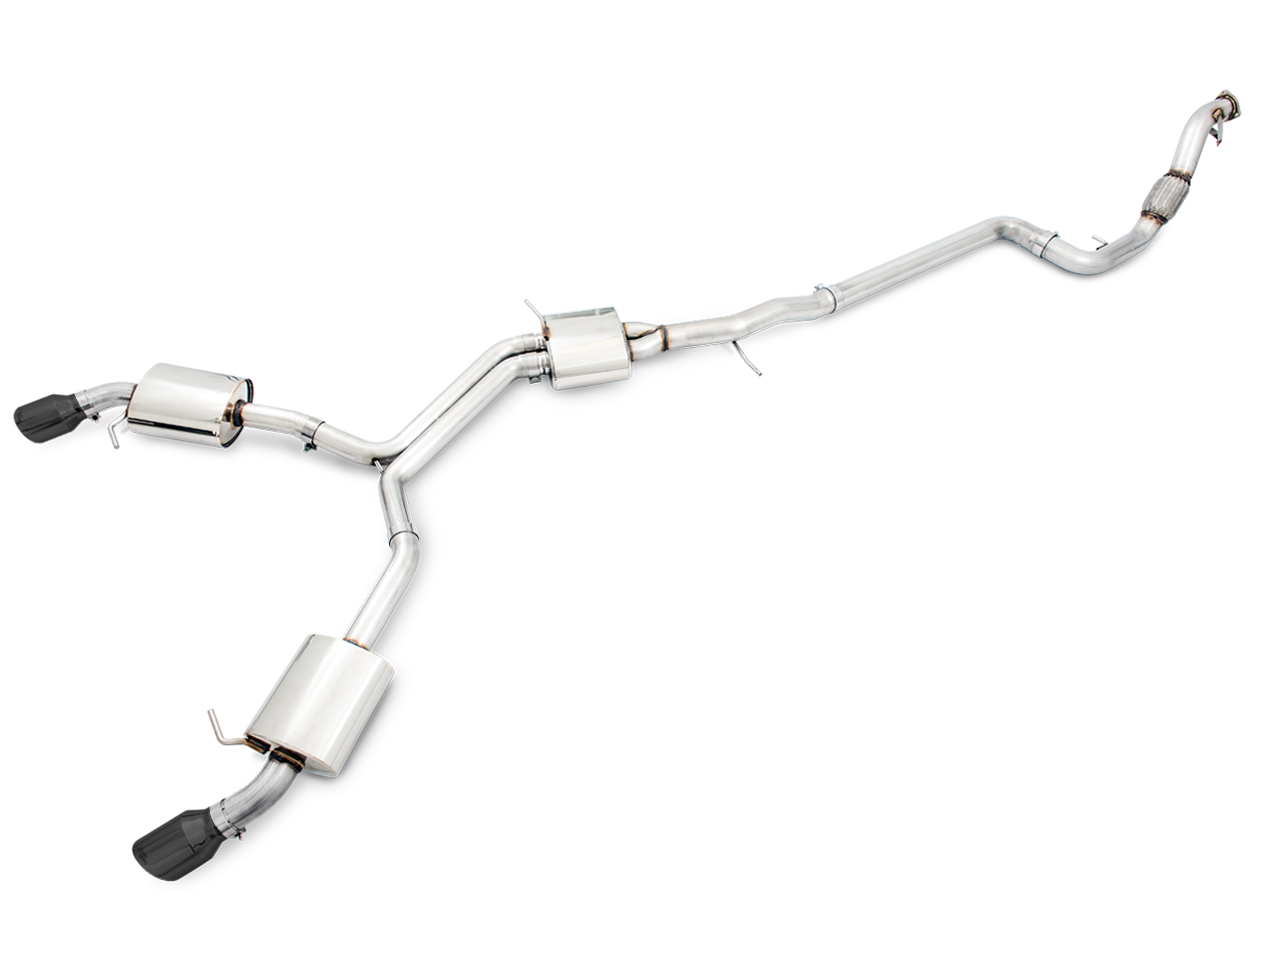 AWE Touring Edition Exhaust for B9 A5, Dual Outlet - Diamond Black Tips (includes DP)